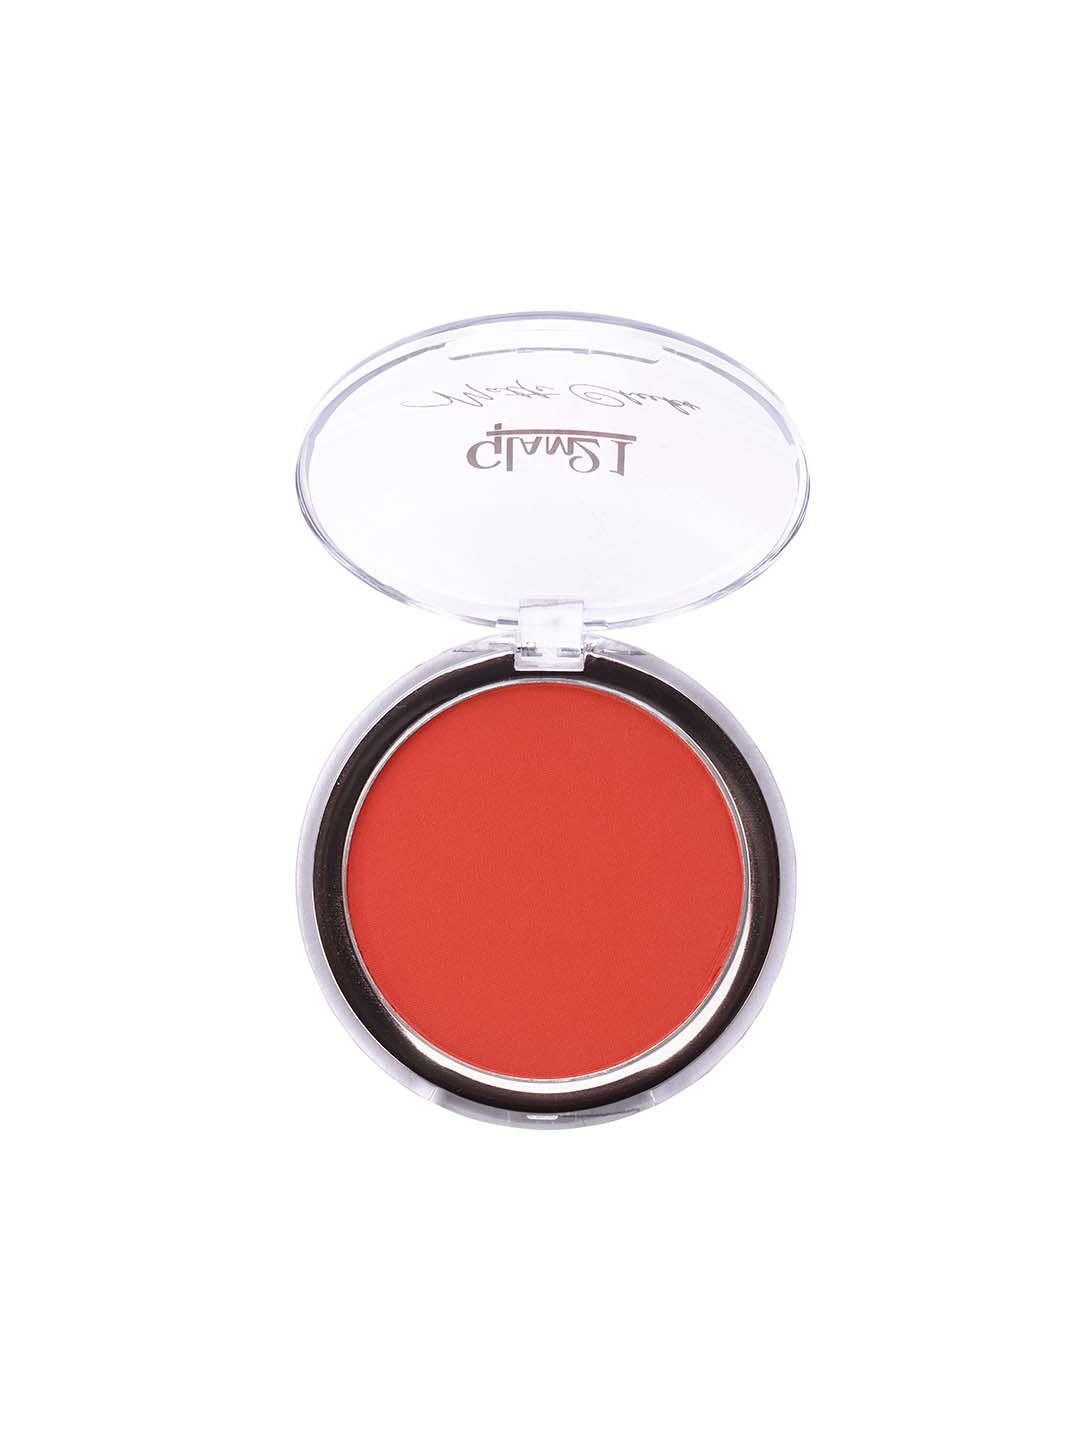 glam21 matte cheek perfect pop of color blush 5gm - shade-02